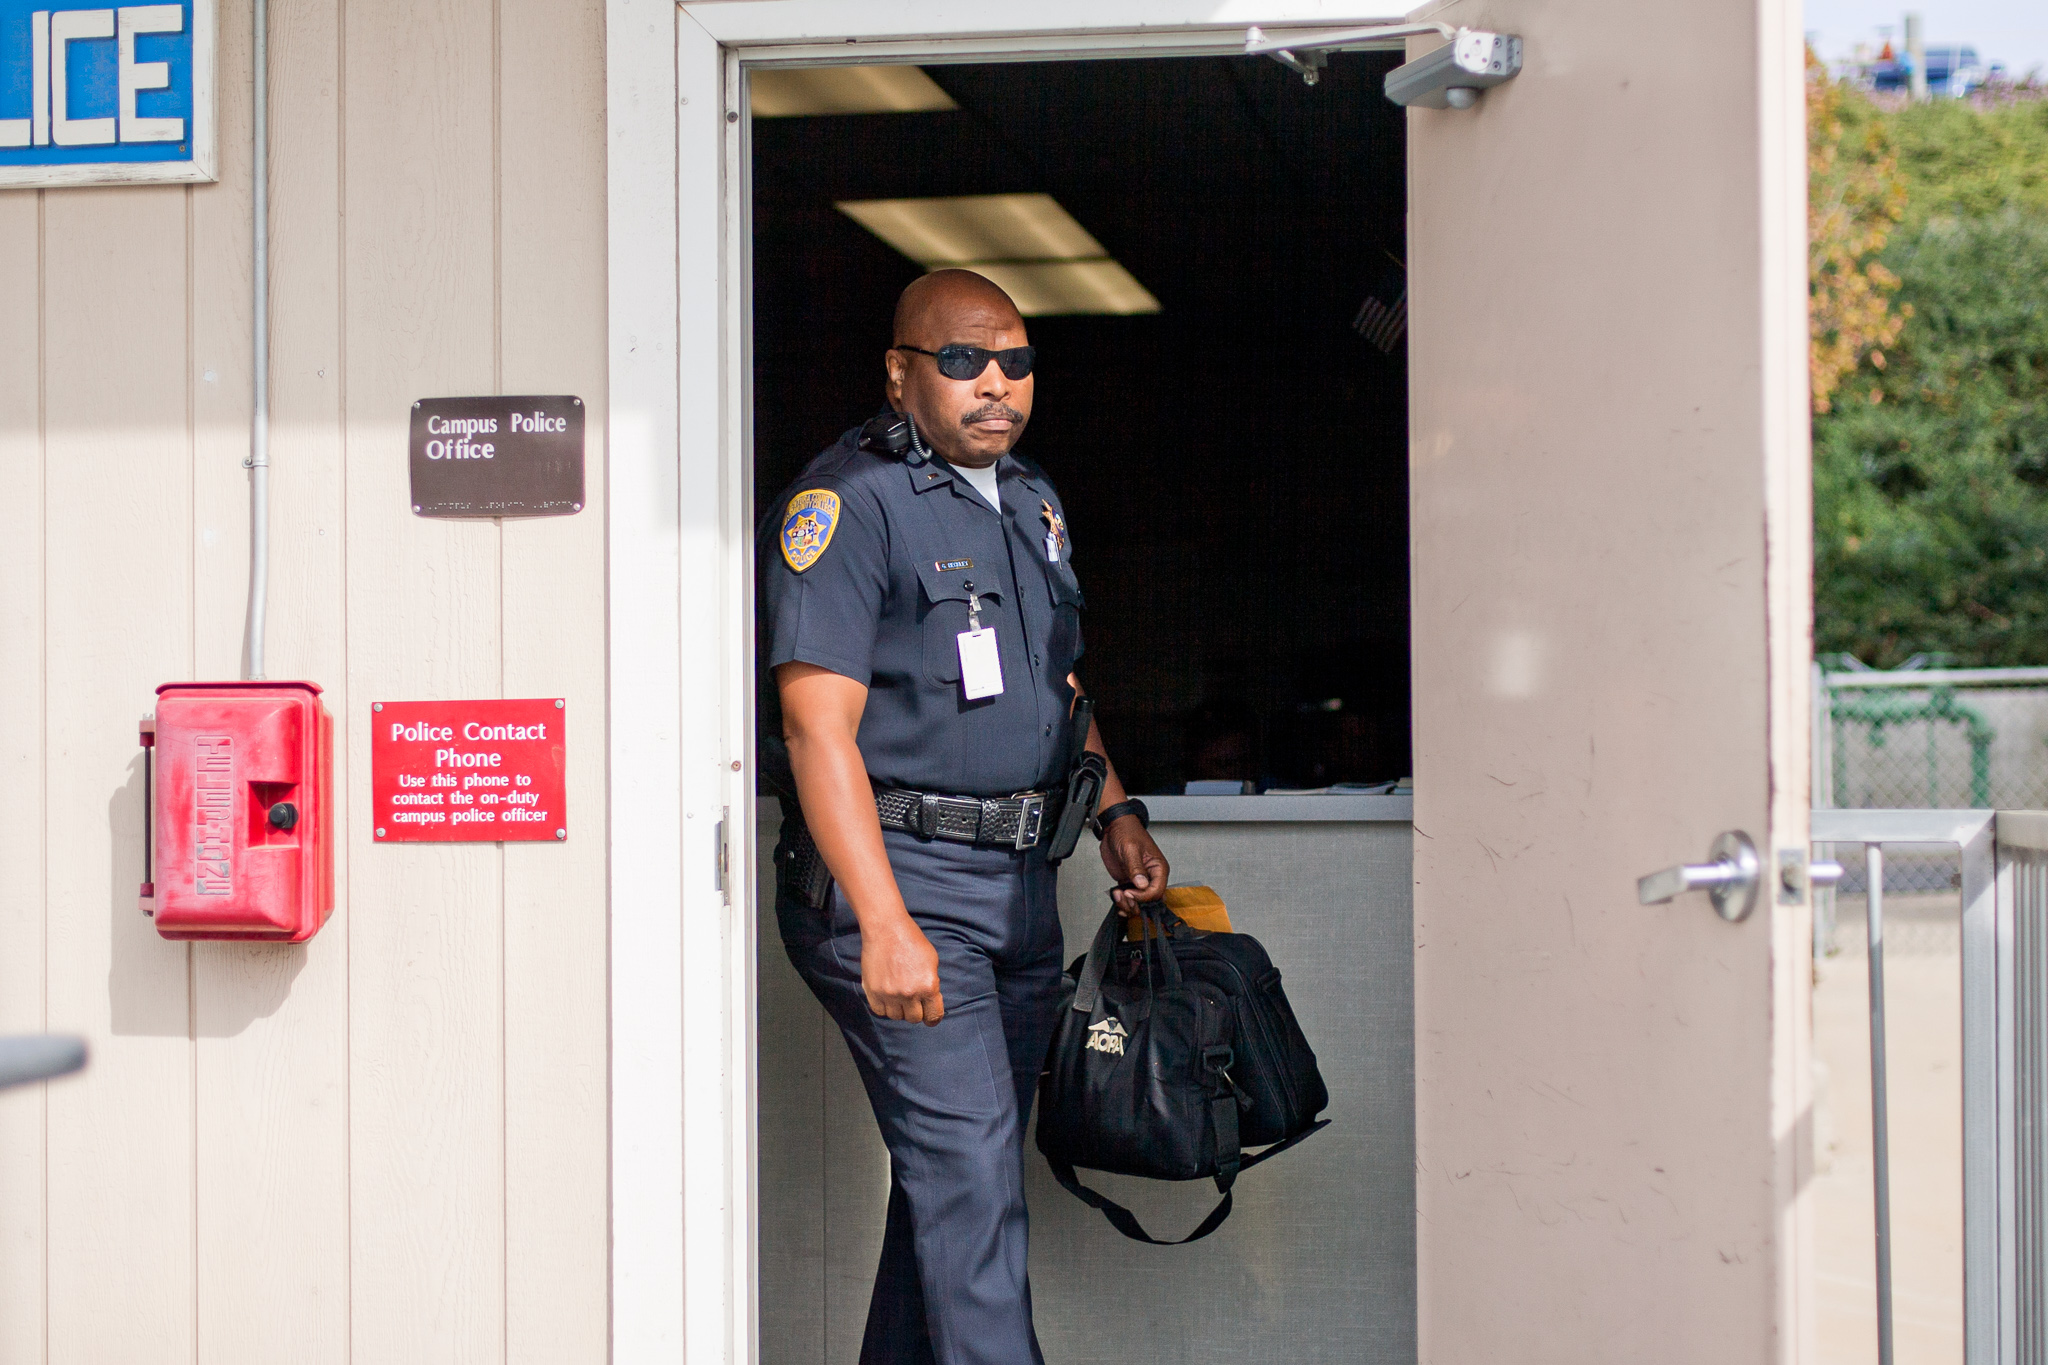 Lt. Gregory Beckley leaves the old Moorpark College Police office in 2012.